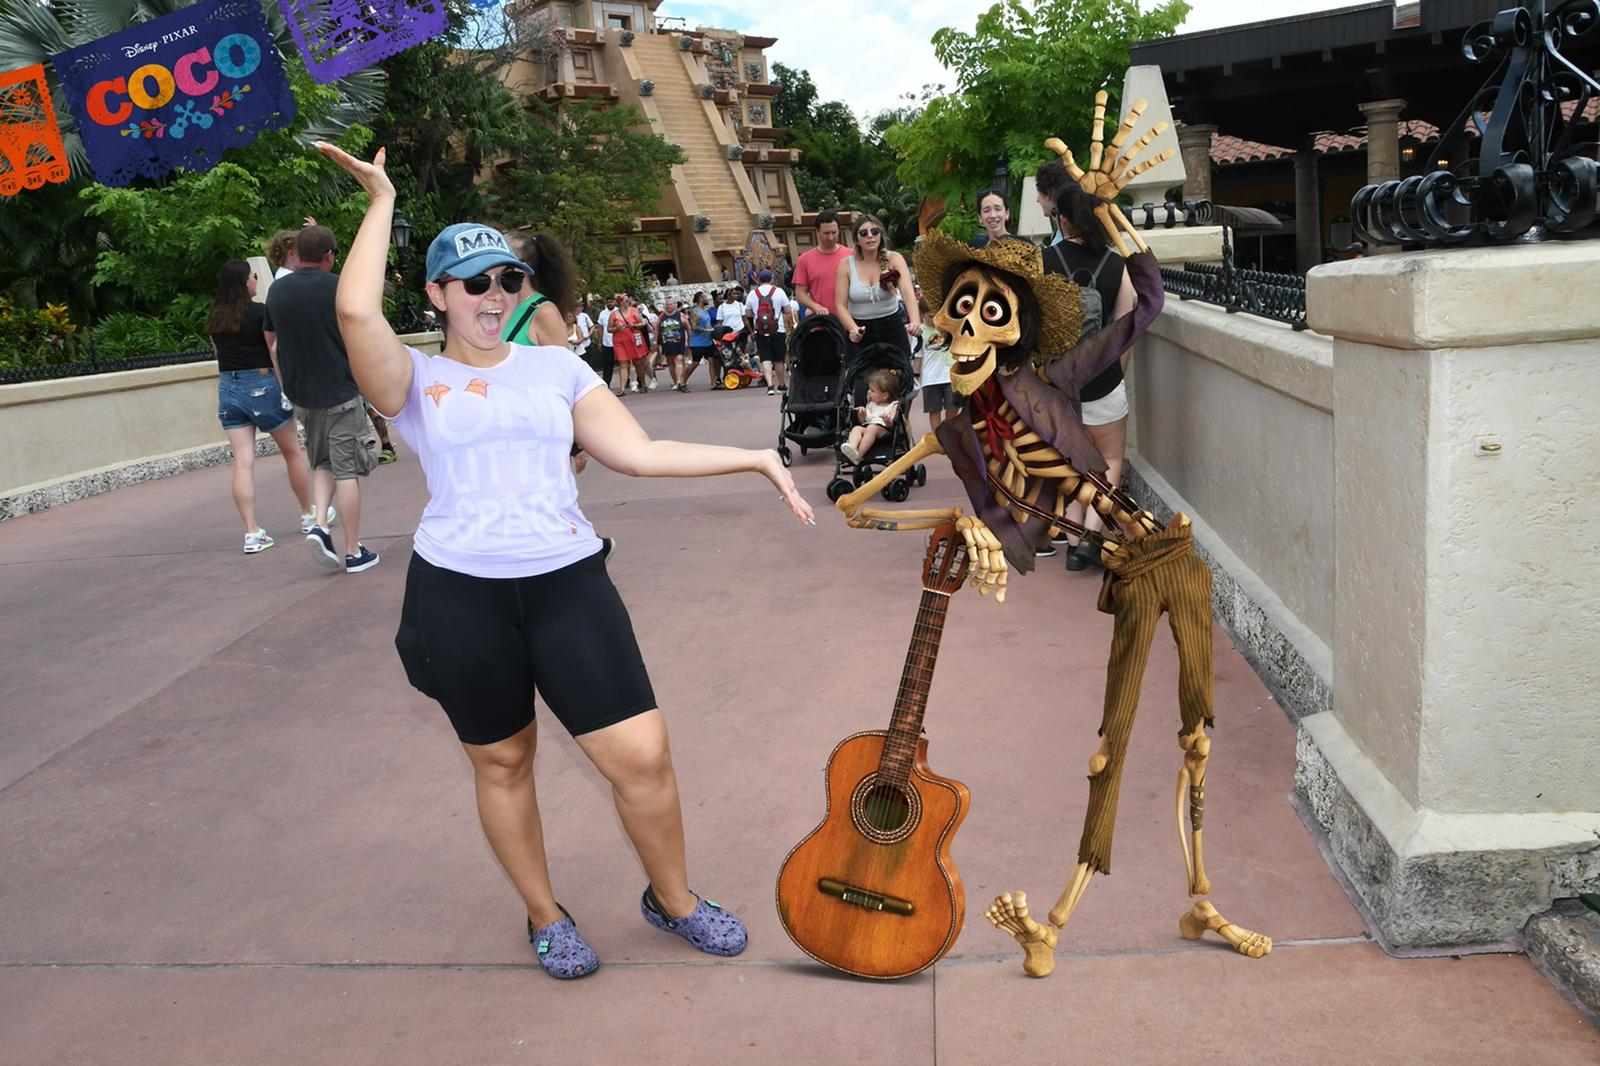 Pose With 'Encanto' and 'Coco' Characters in These New Disney World Photo  Ops!